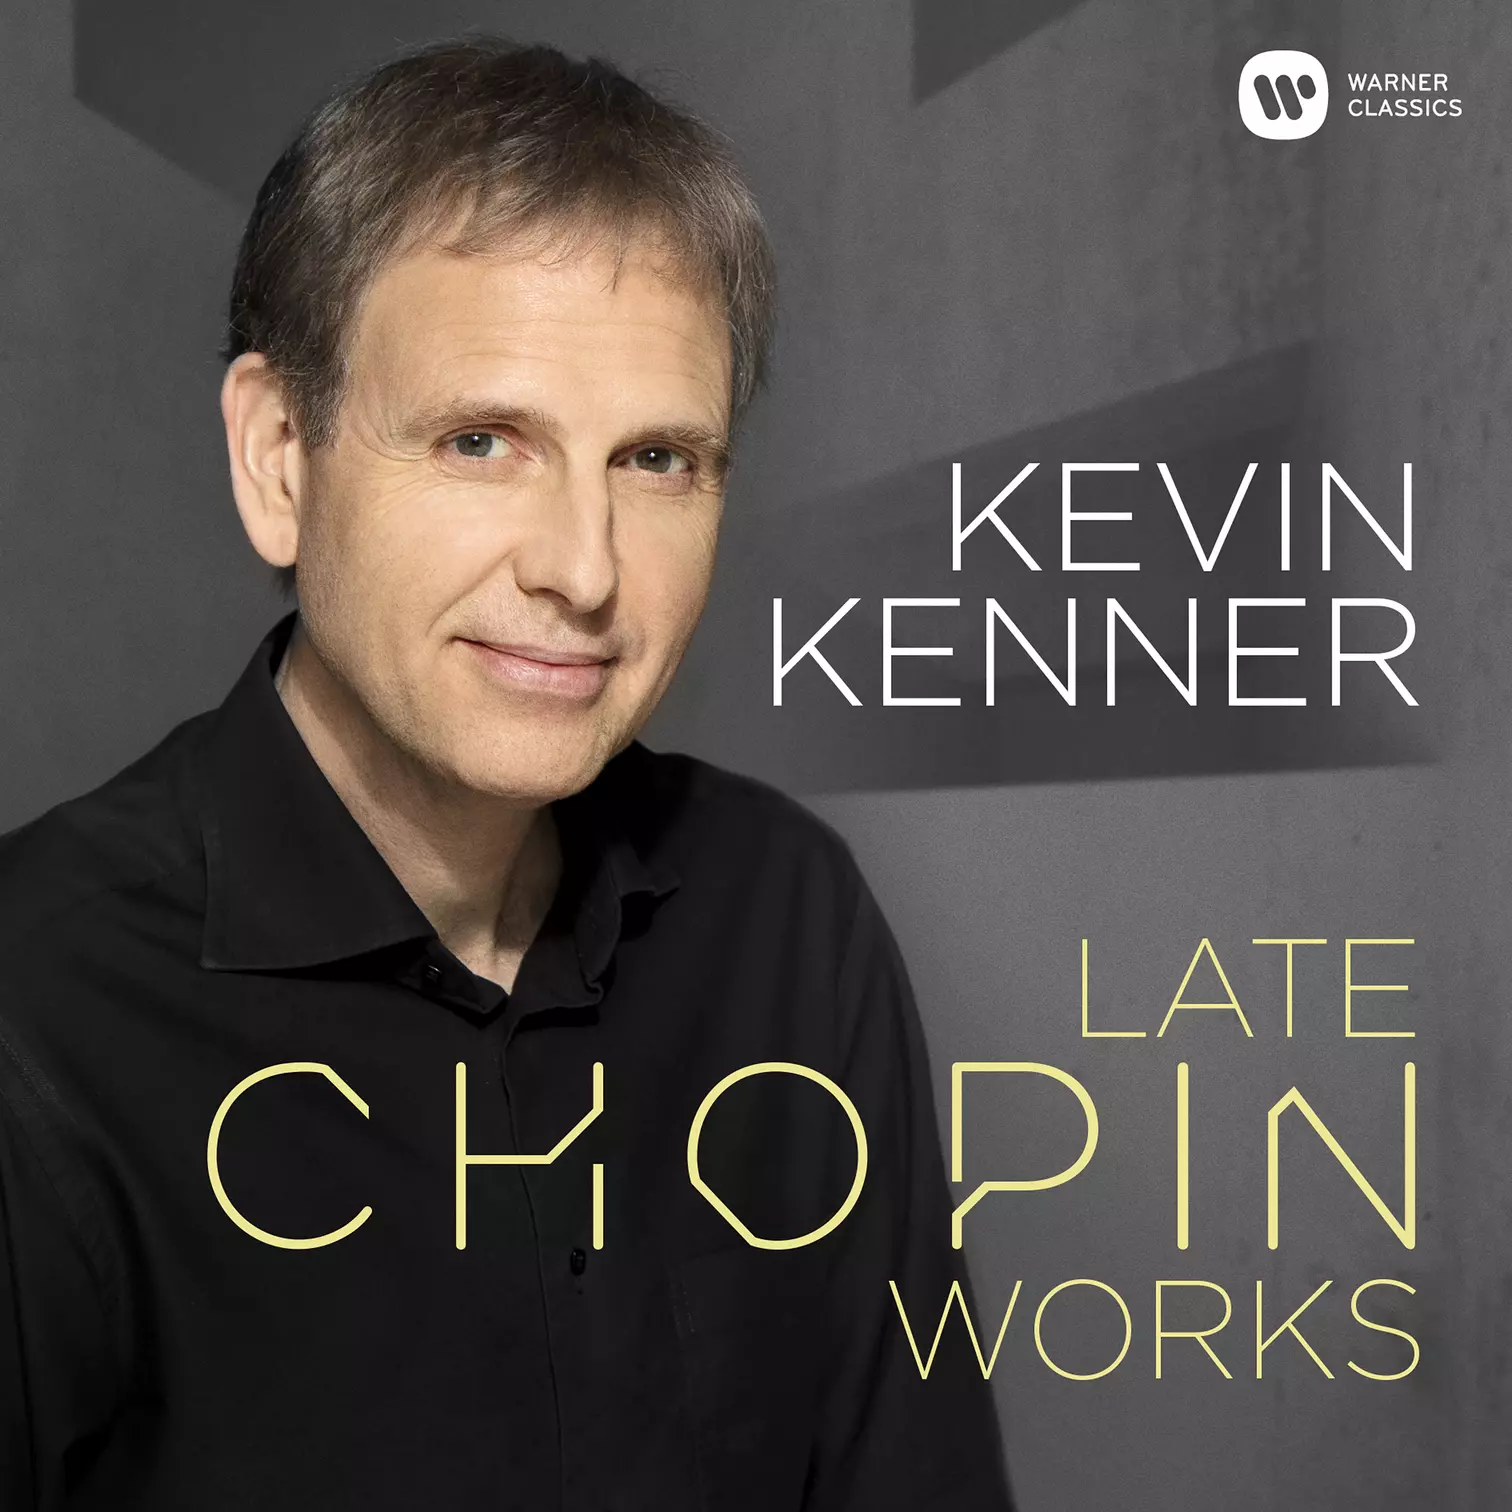 Late Chopin Works